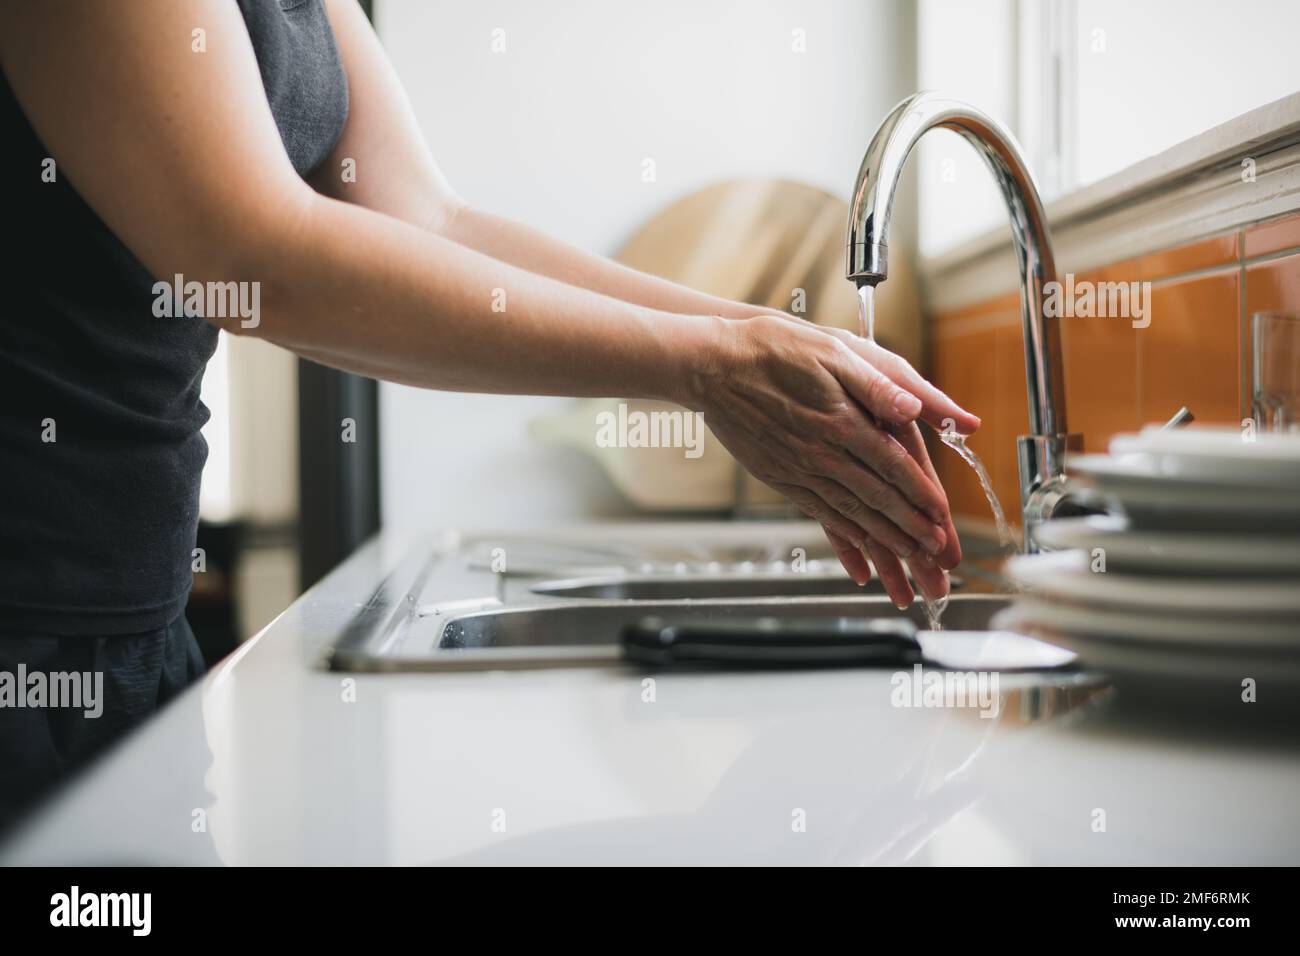 Woman washing hands in kitchen sink, close up of hands with water running. Stock Photo